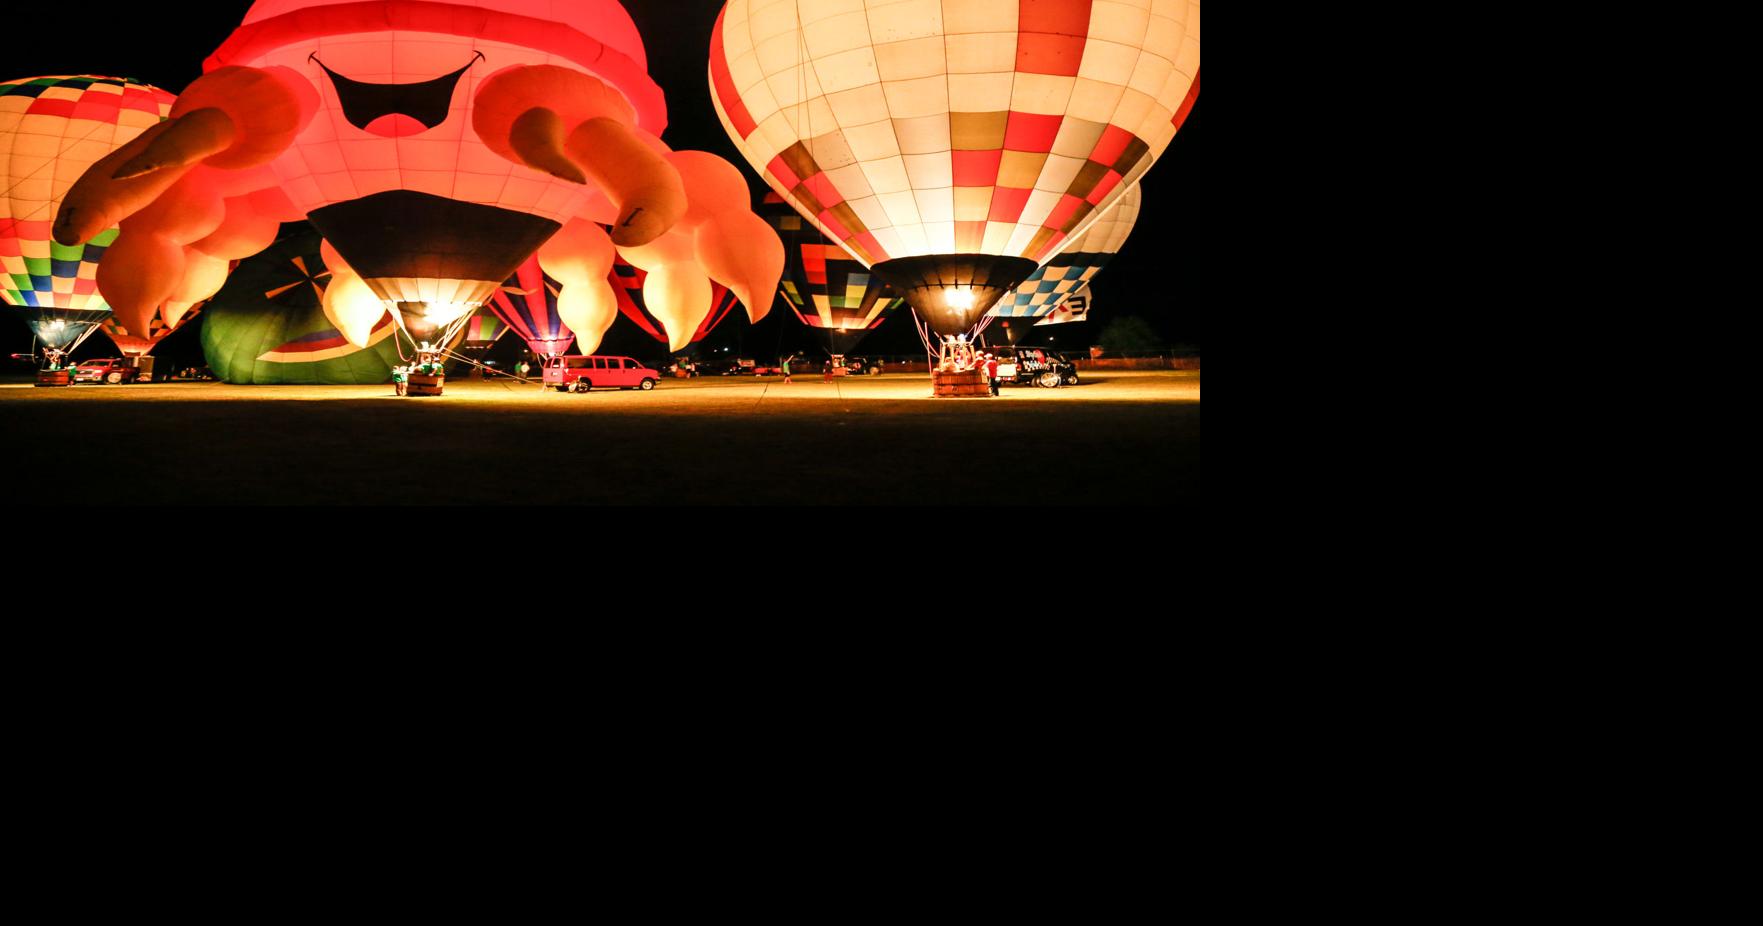 VALLEY VISIONS Paris Balloon and Music Festival ready to take flight